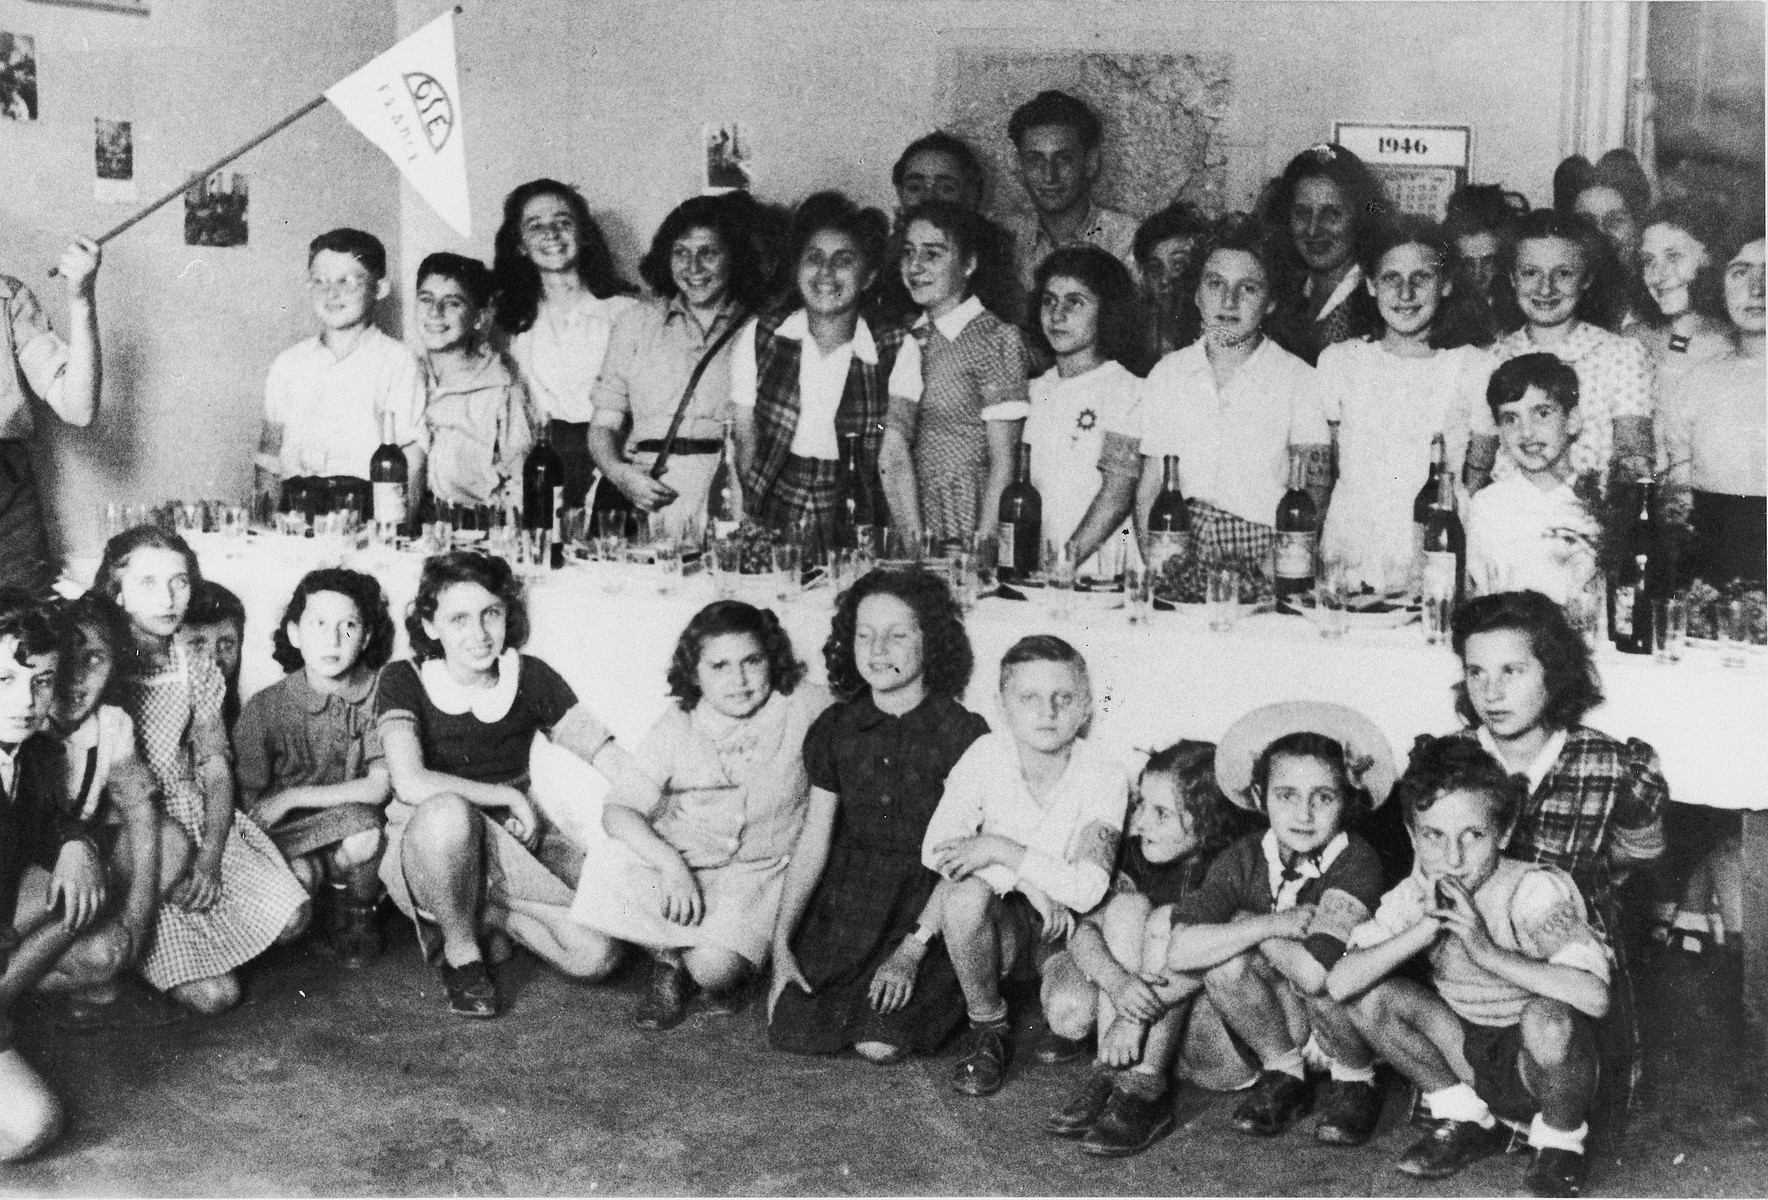 Children gather around a festive table set with wine and wine cups in an OSE home in France.

Among those pictured is former St. Louis passenger, Judith Koeppel.